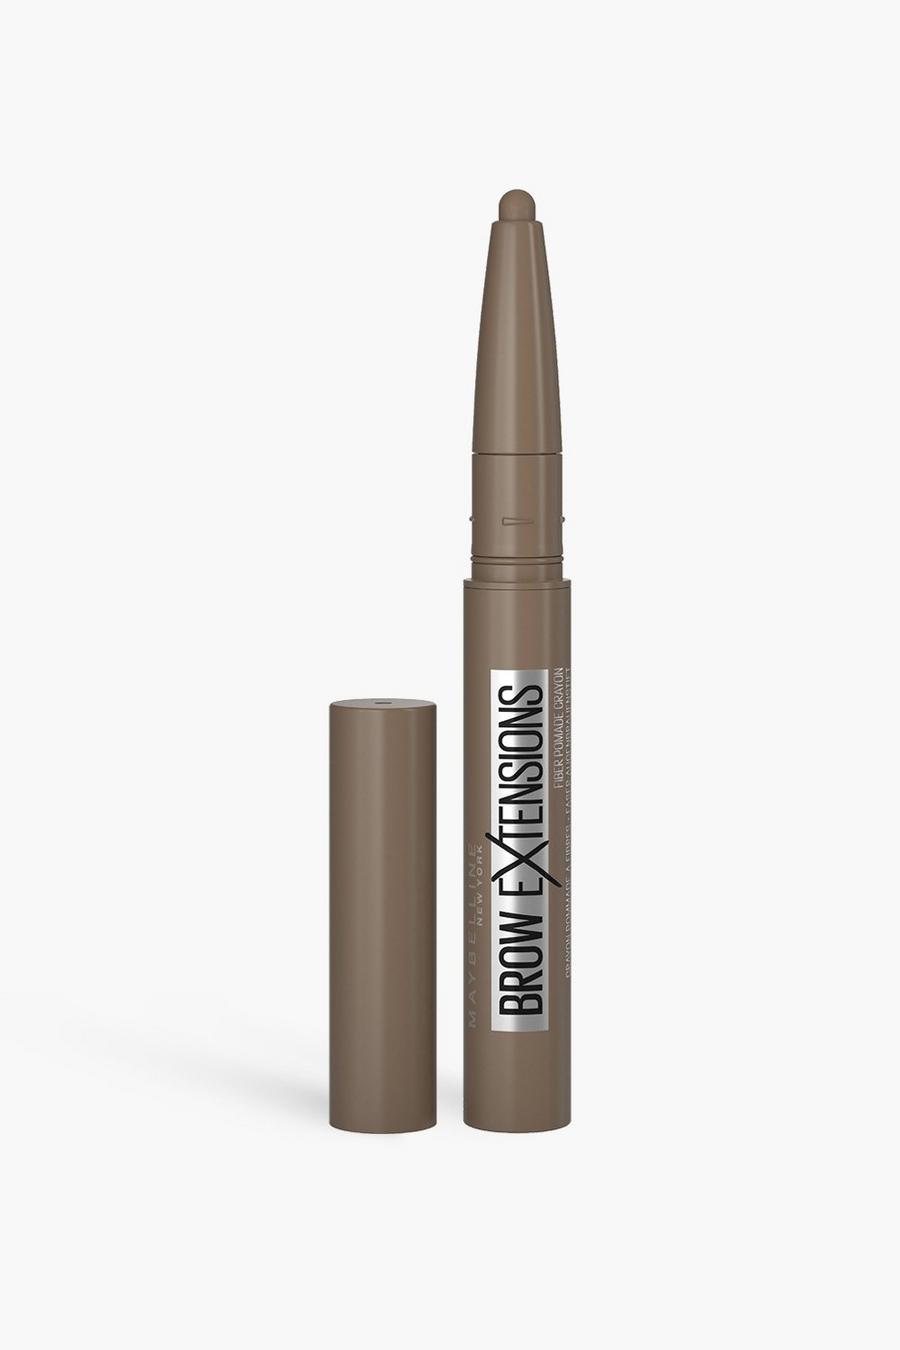 Maybelline Brow Extensions Eyebrow Pomade Crayon - 02 Soft Brown